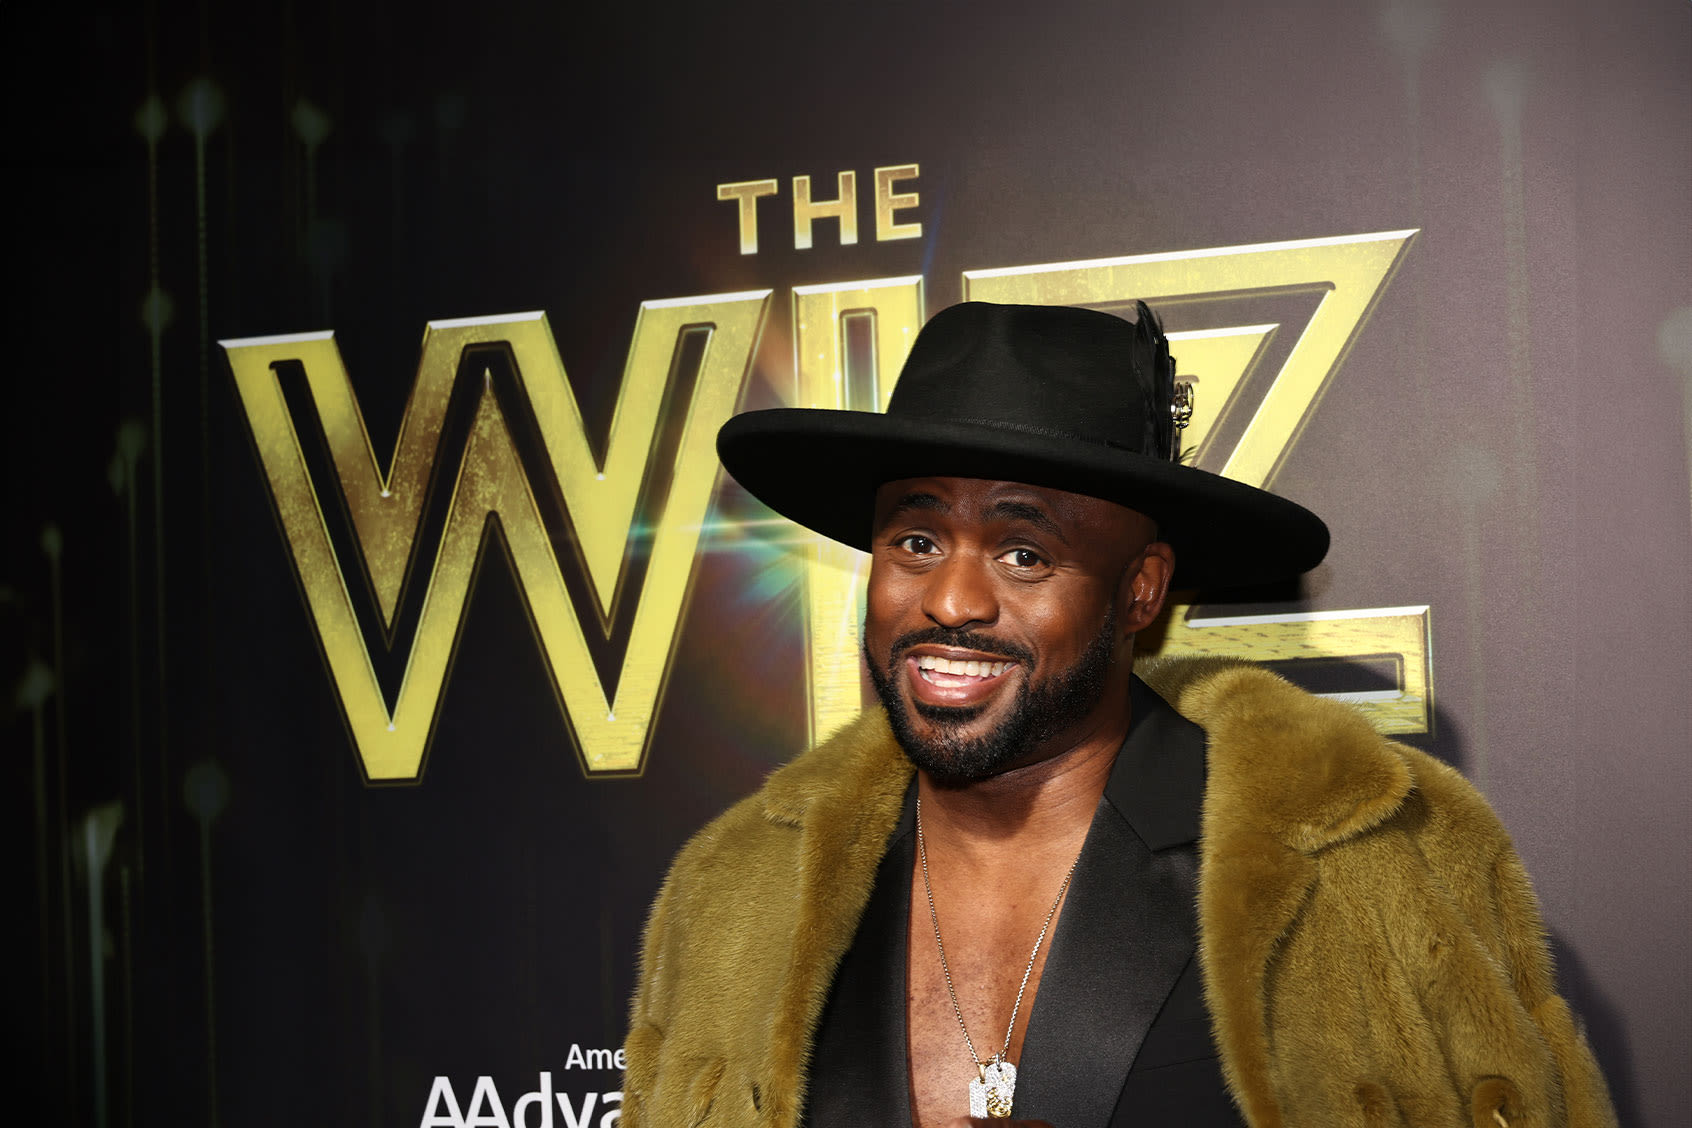 Wayne Brady on why coming out as pansexual made "The Wiz" star happy